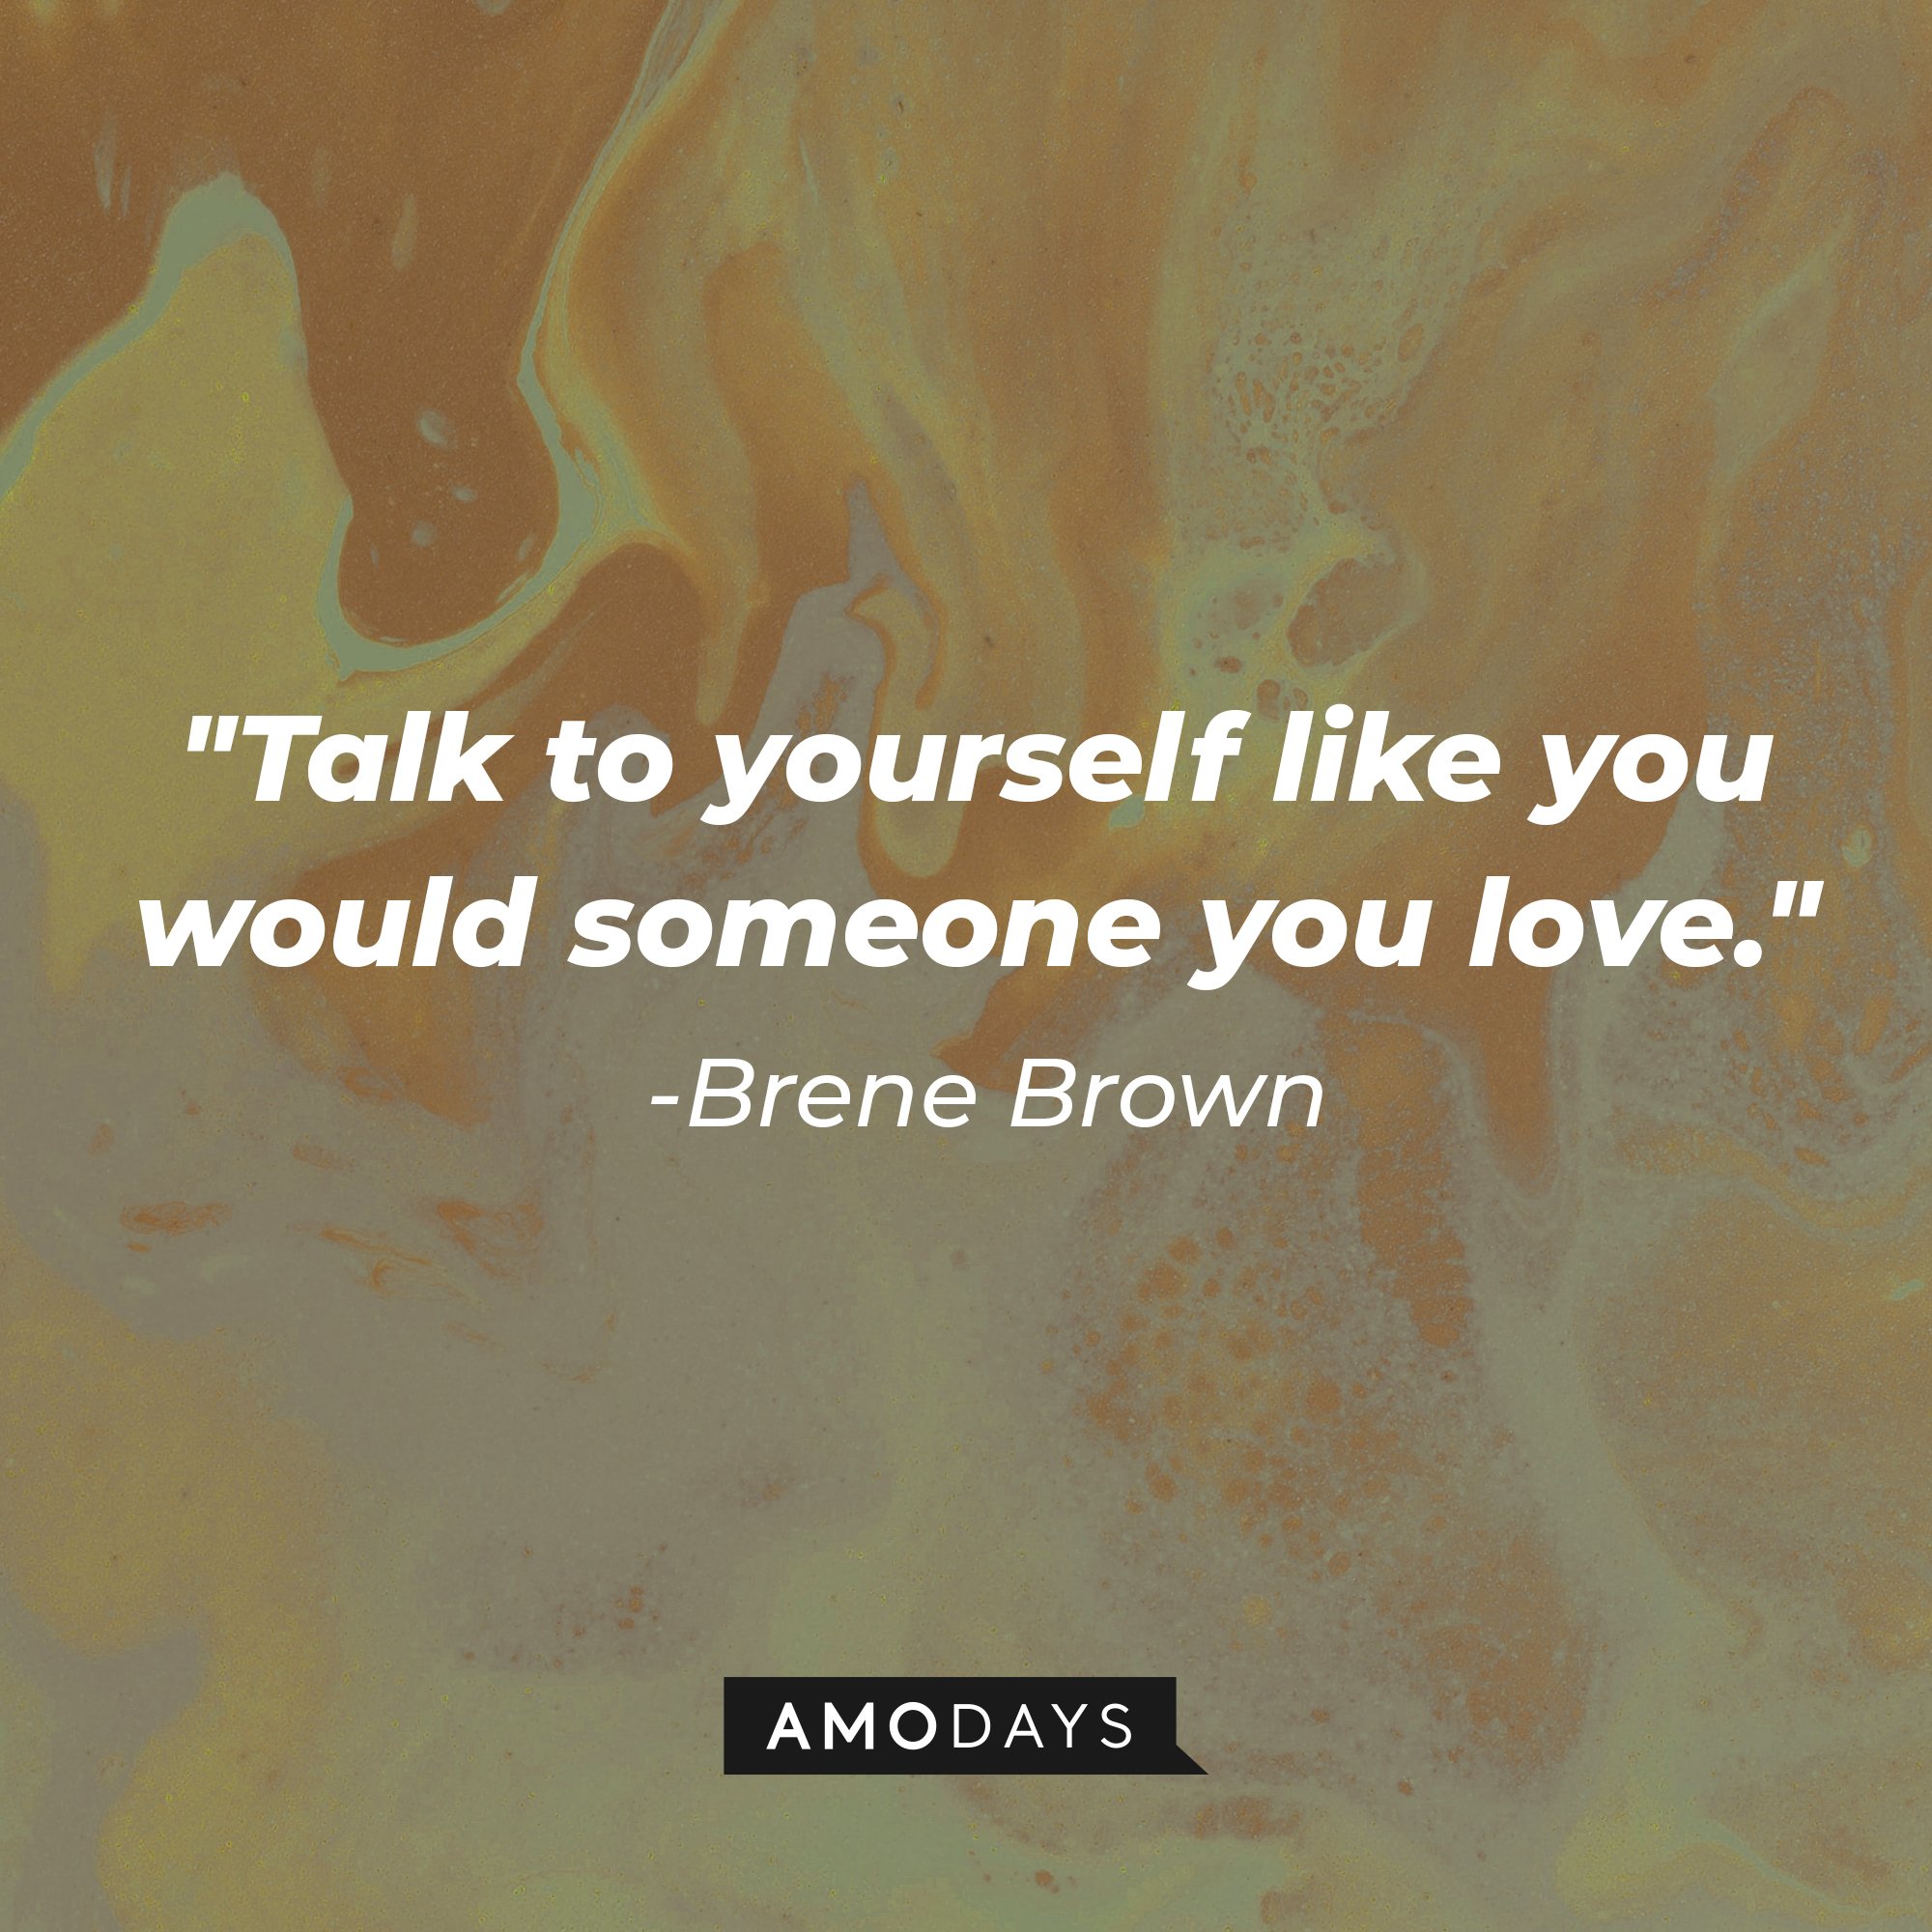 Brene Brown’s quote: "Talk to yourself like you would someone you love." | Image: AmoDays